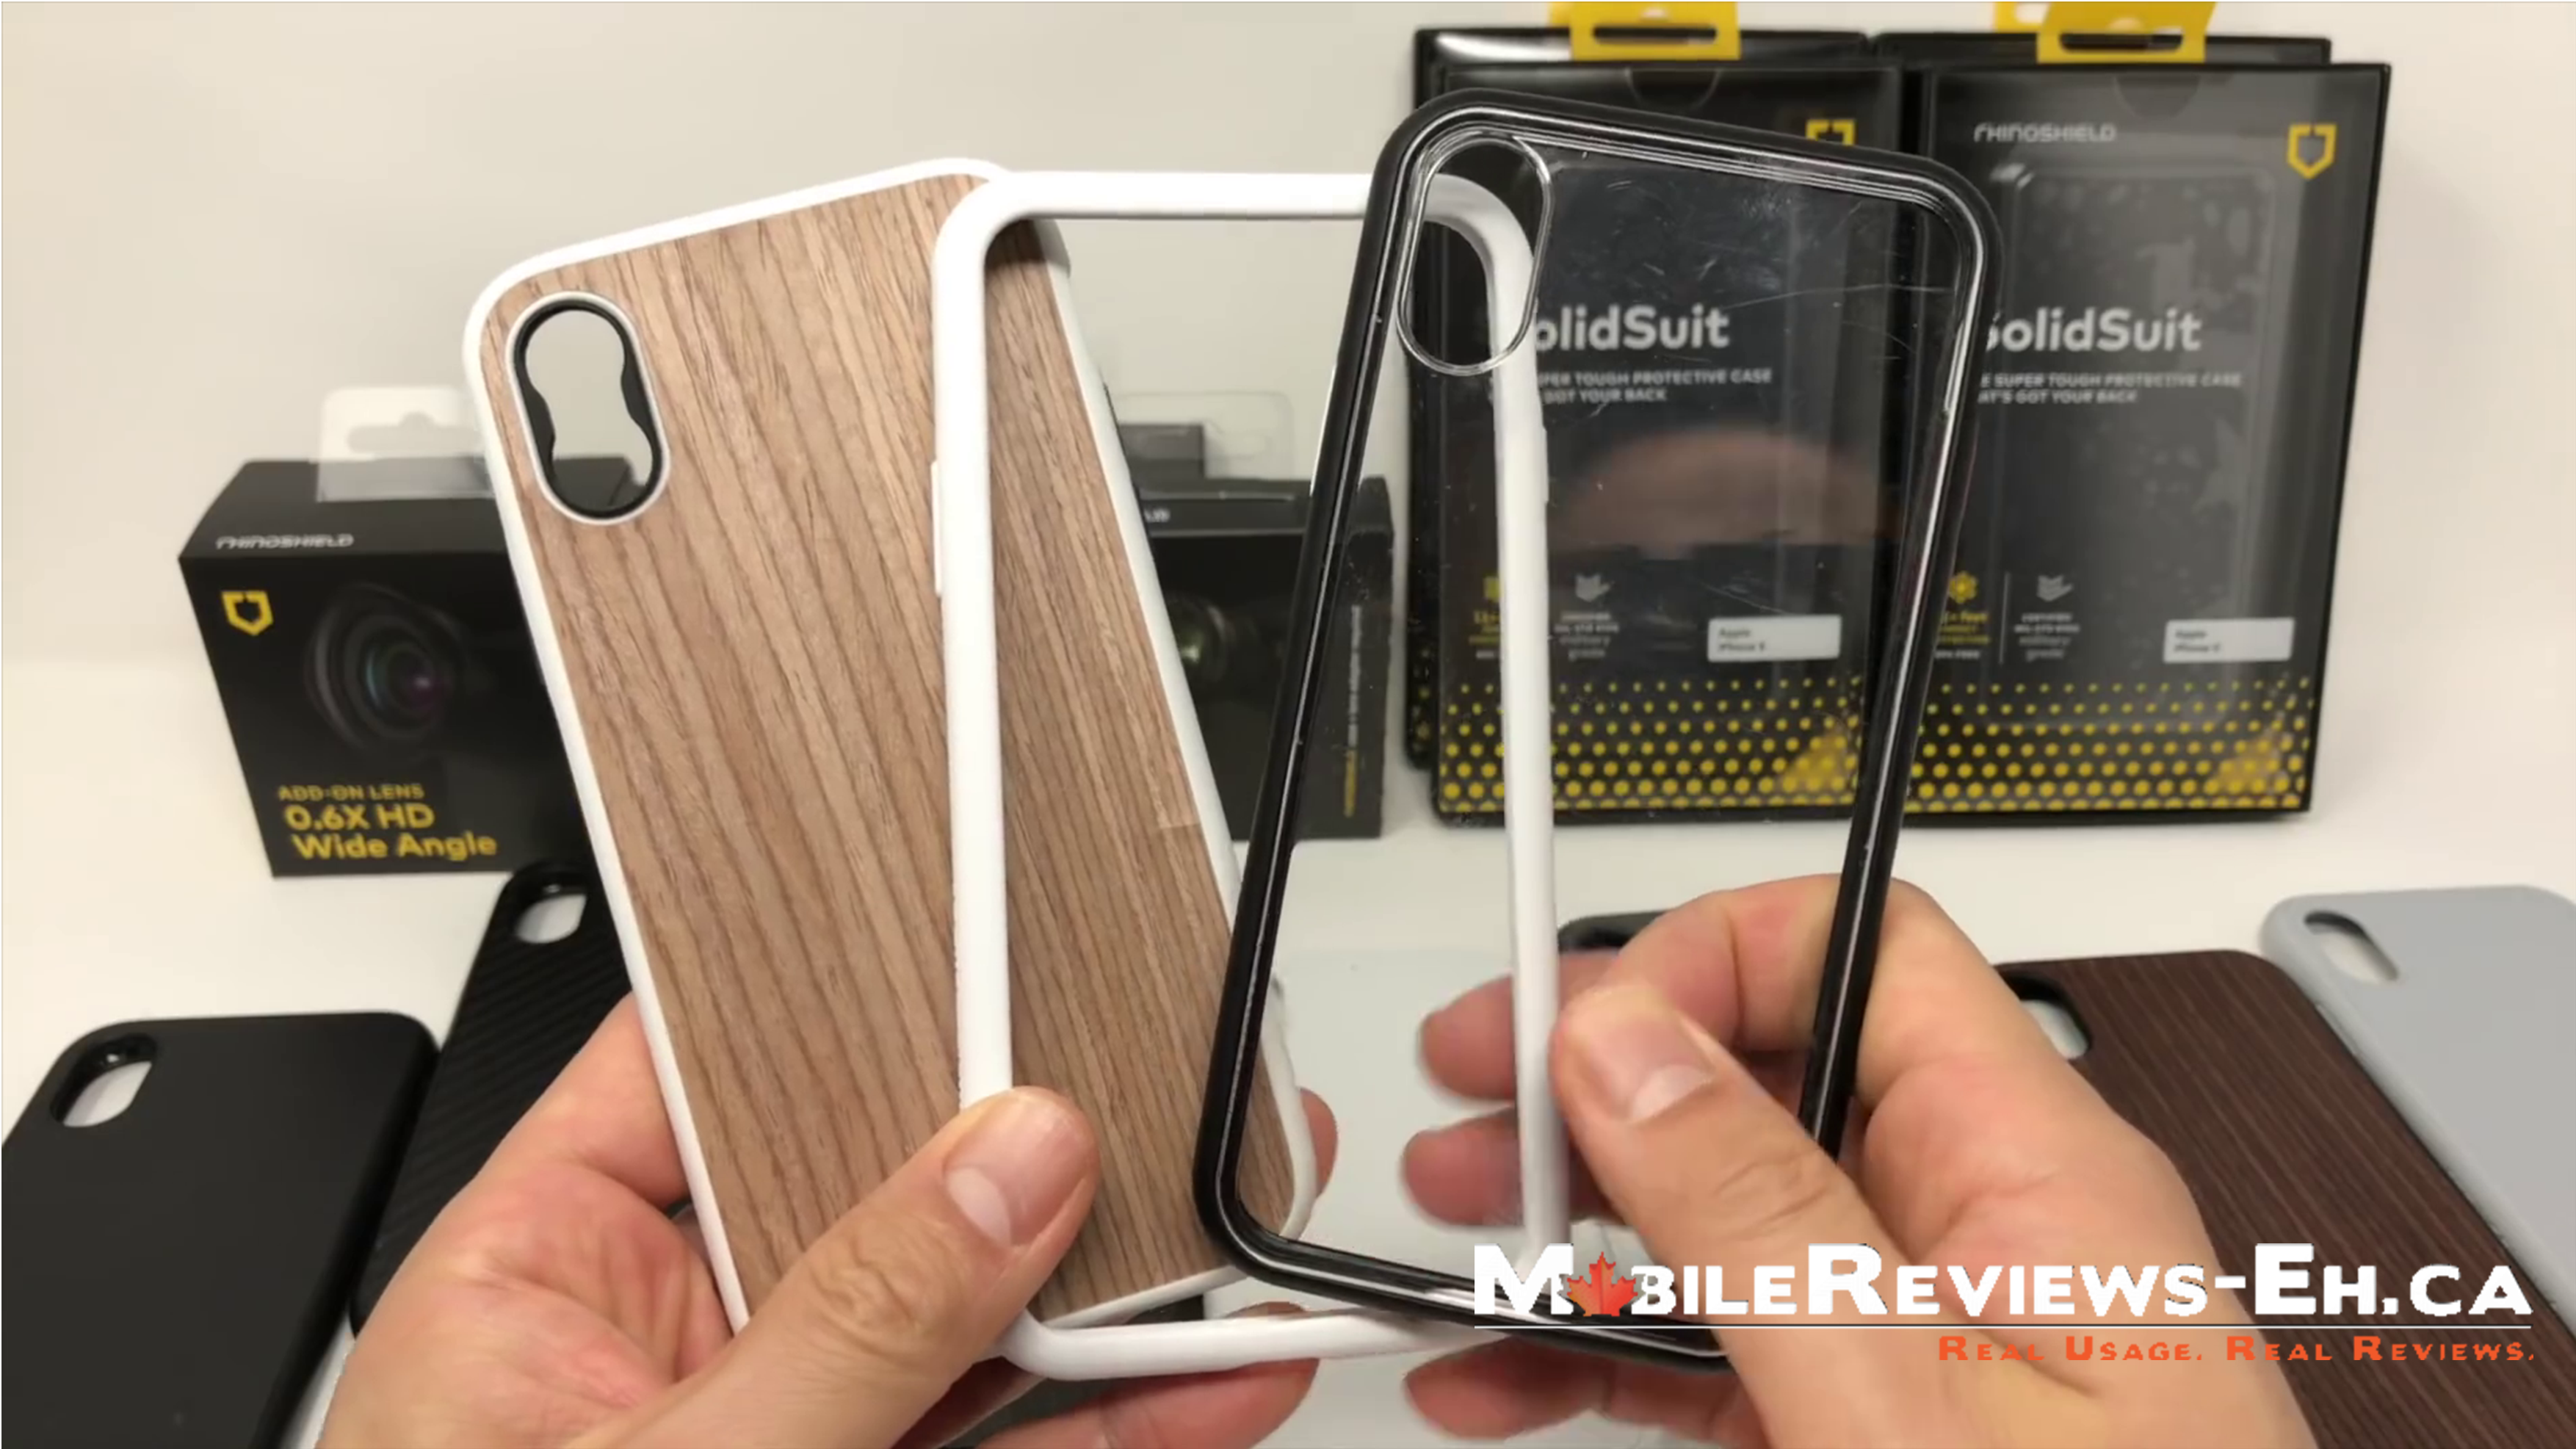 Goodwill Mount Bank was How tough are these cases? Evolutive Labs Rhinoshield SolidSuit iPhone X  Review - Mobile Reviews Eh